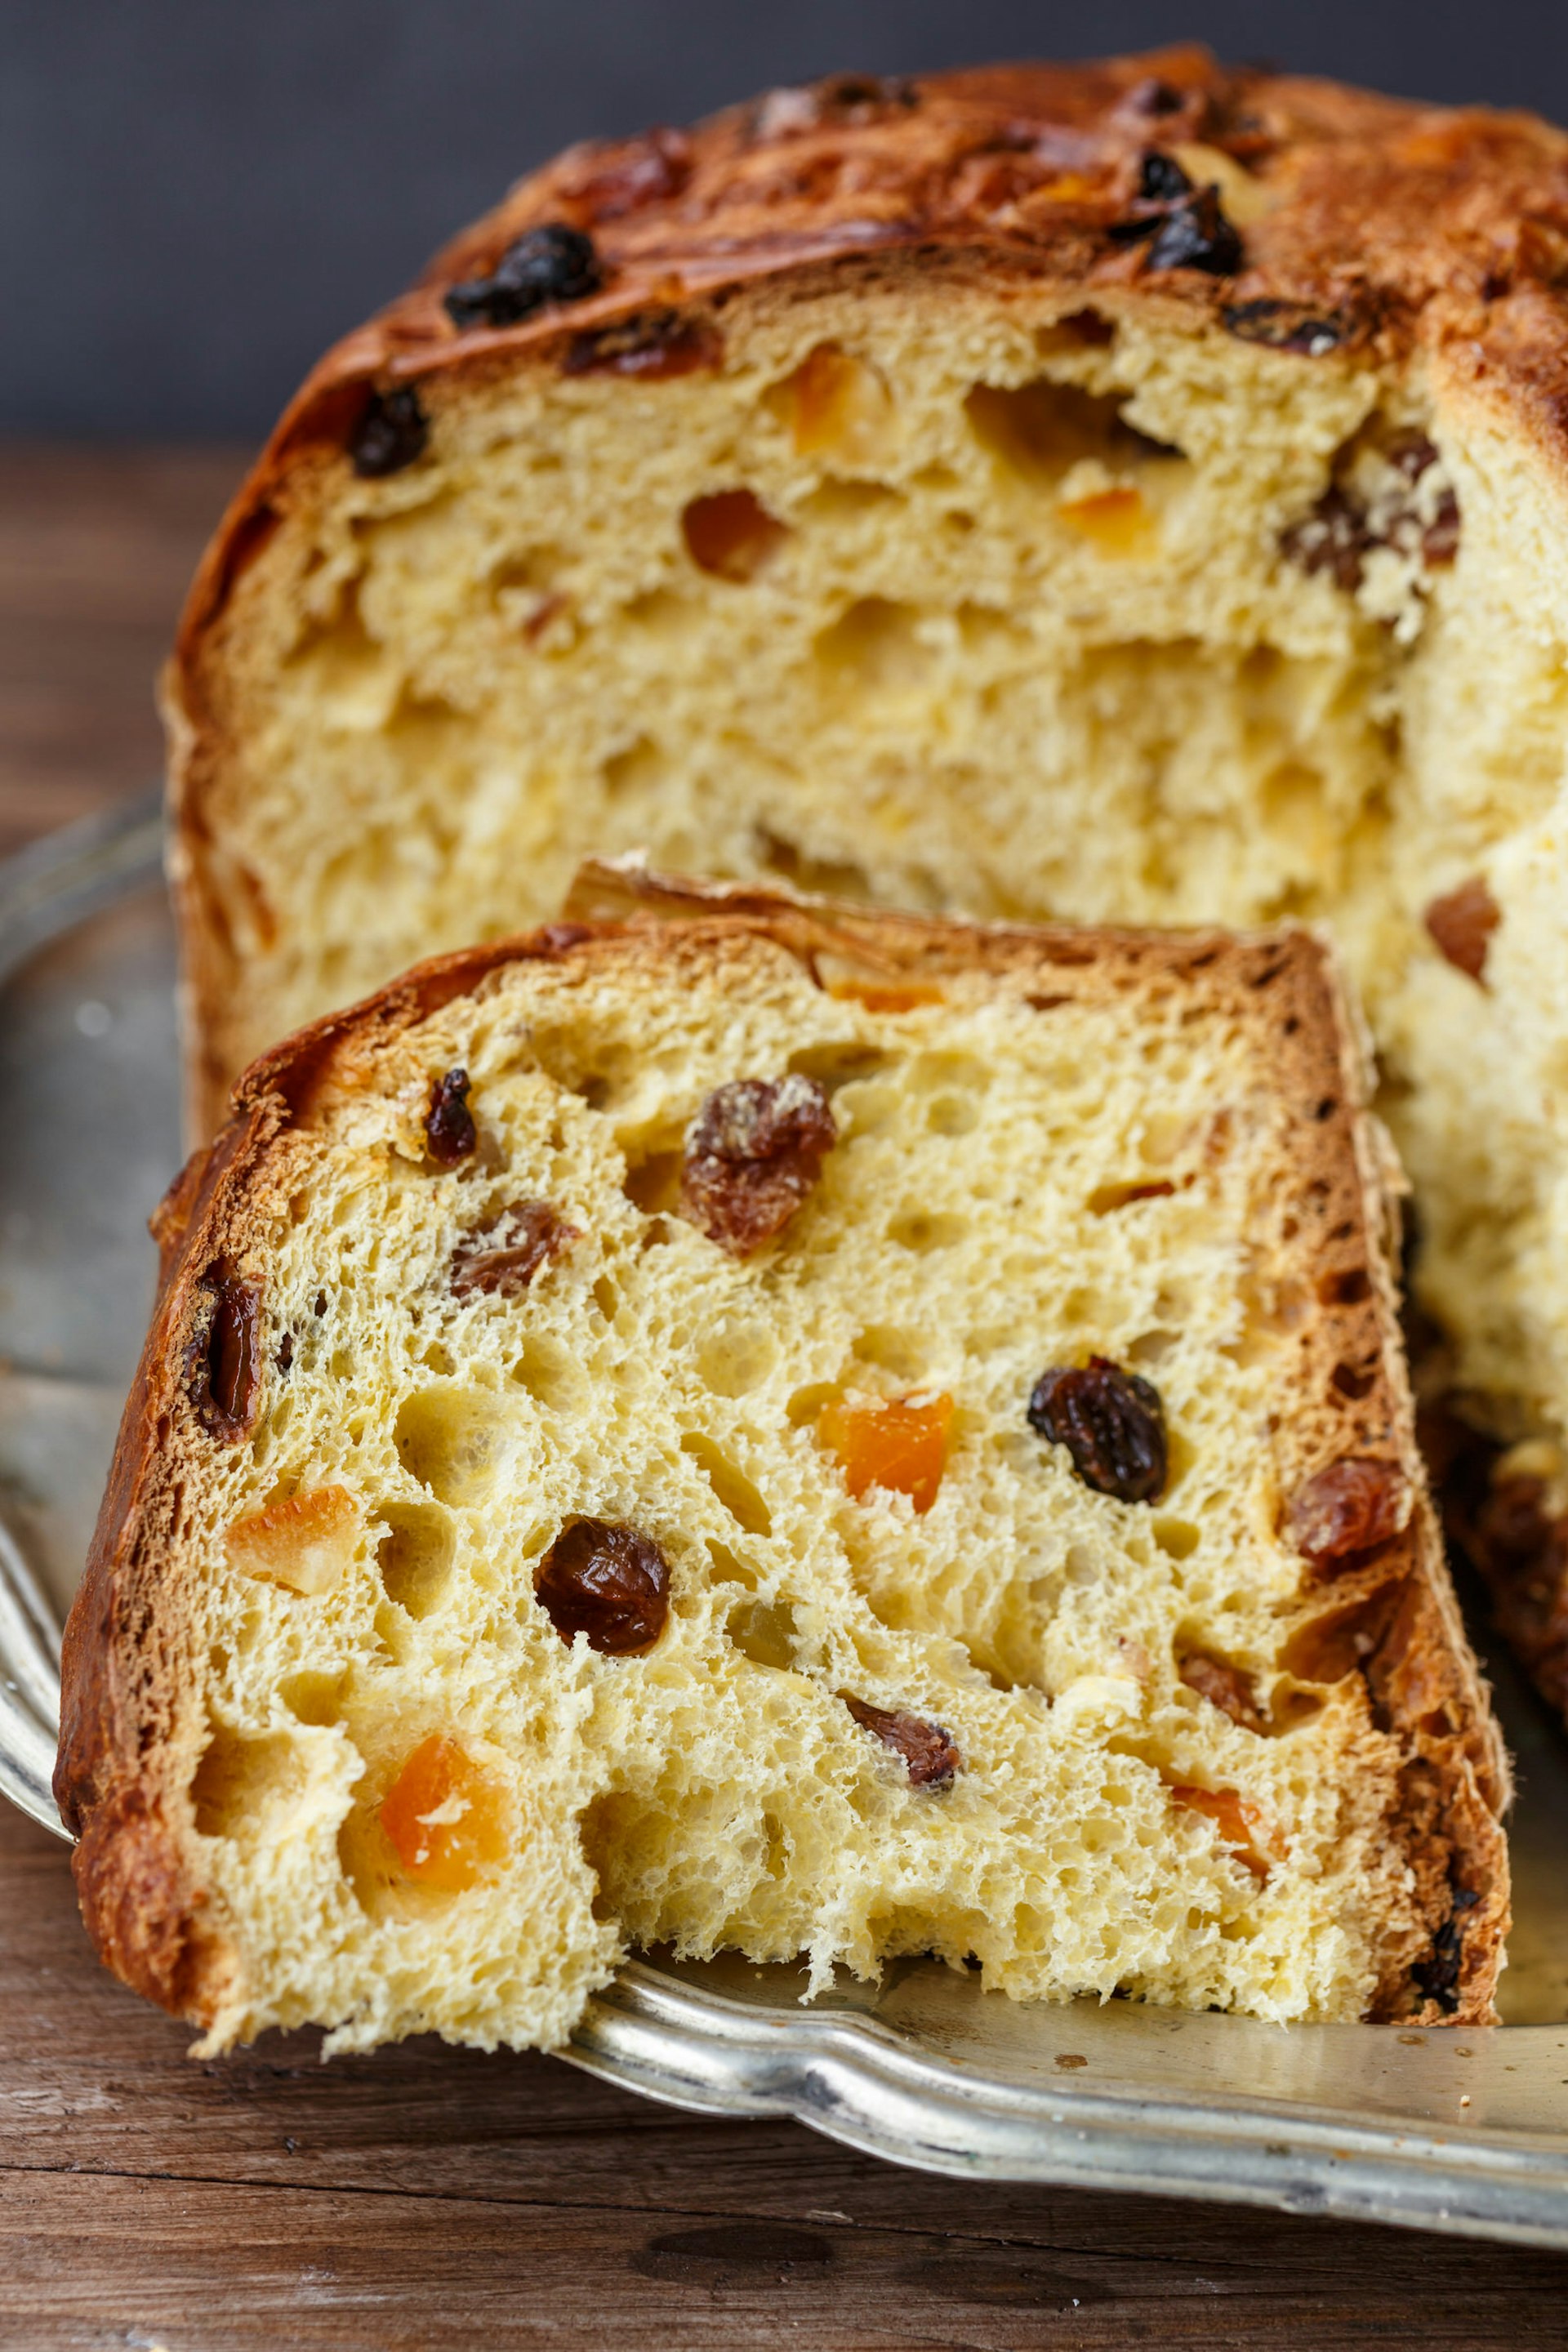 Close up of the crumbly, fruit-filled slice of panettone © Quanthem / Getty Images